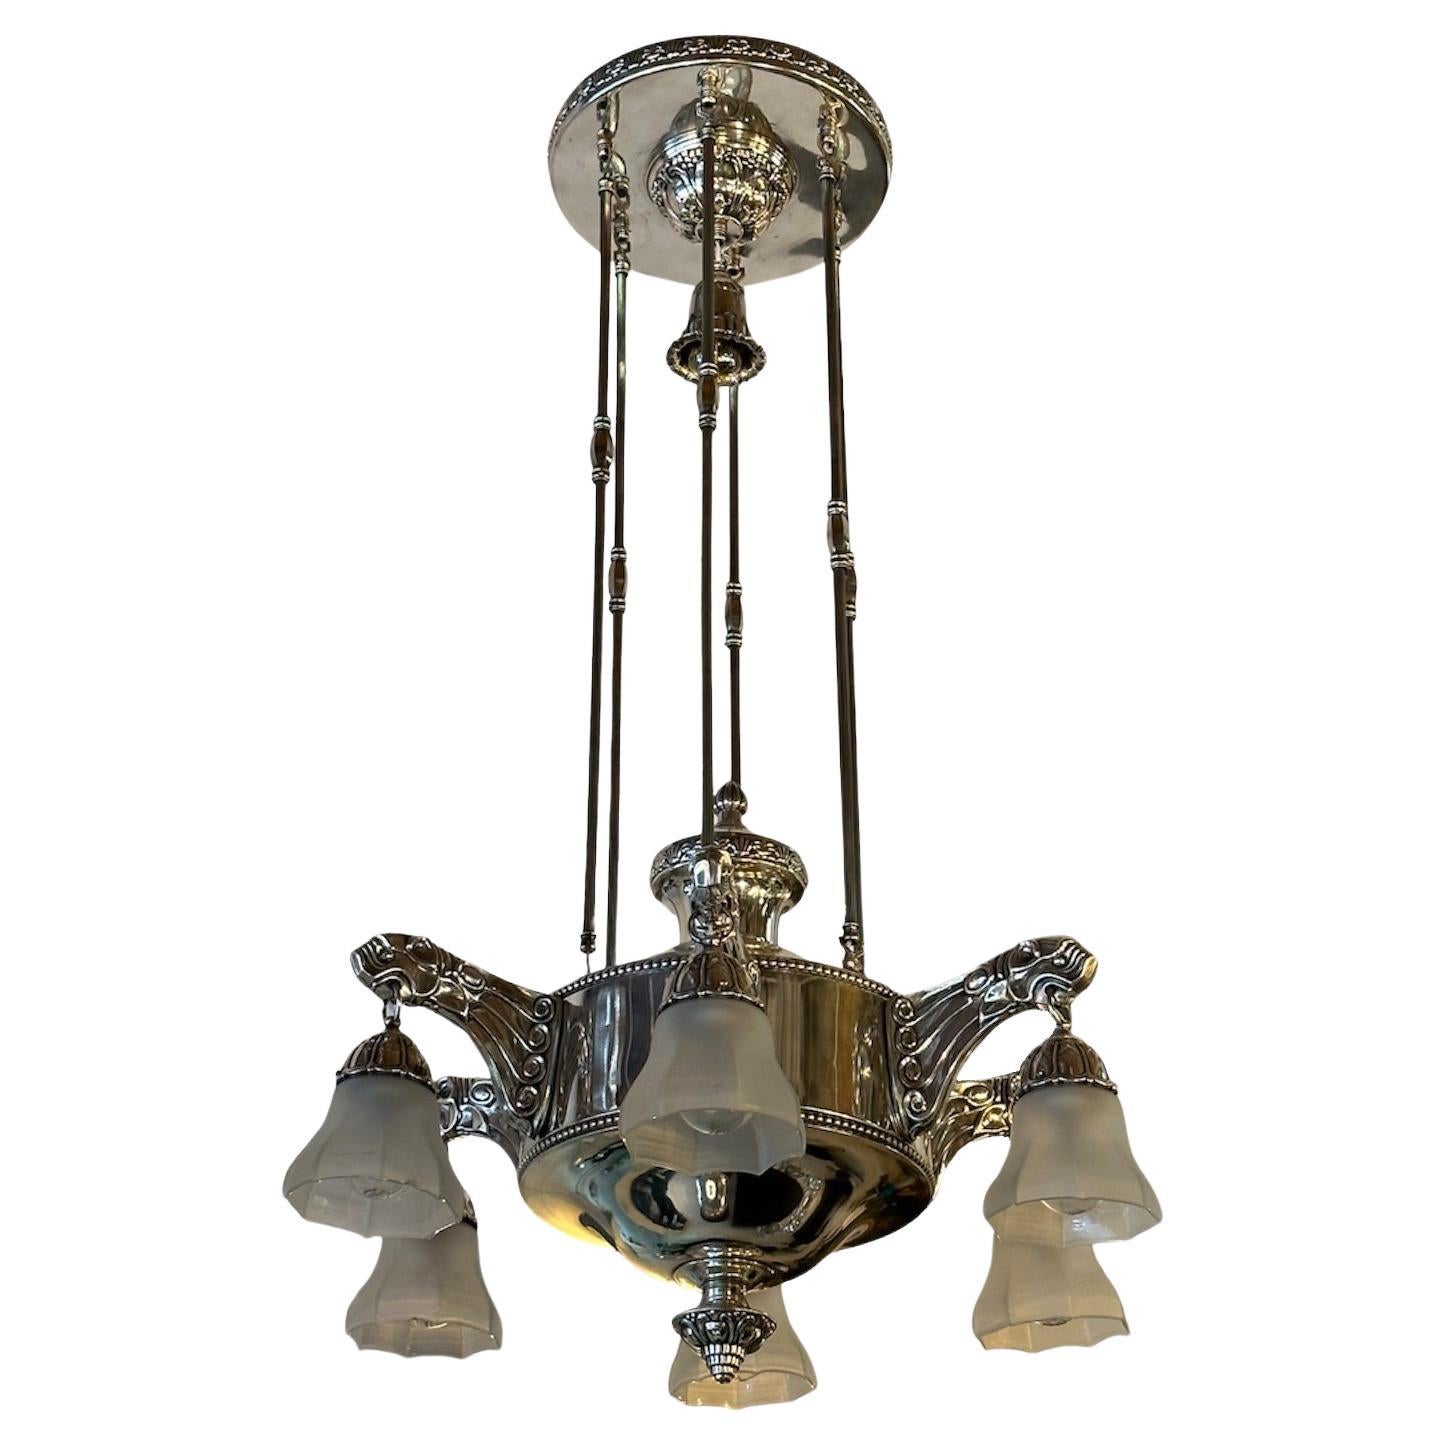 Amaizing Lions Chandelier Viennese Secession, 1900, Silver Plated Bronze  For Sale